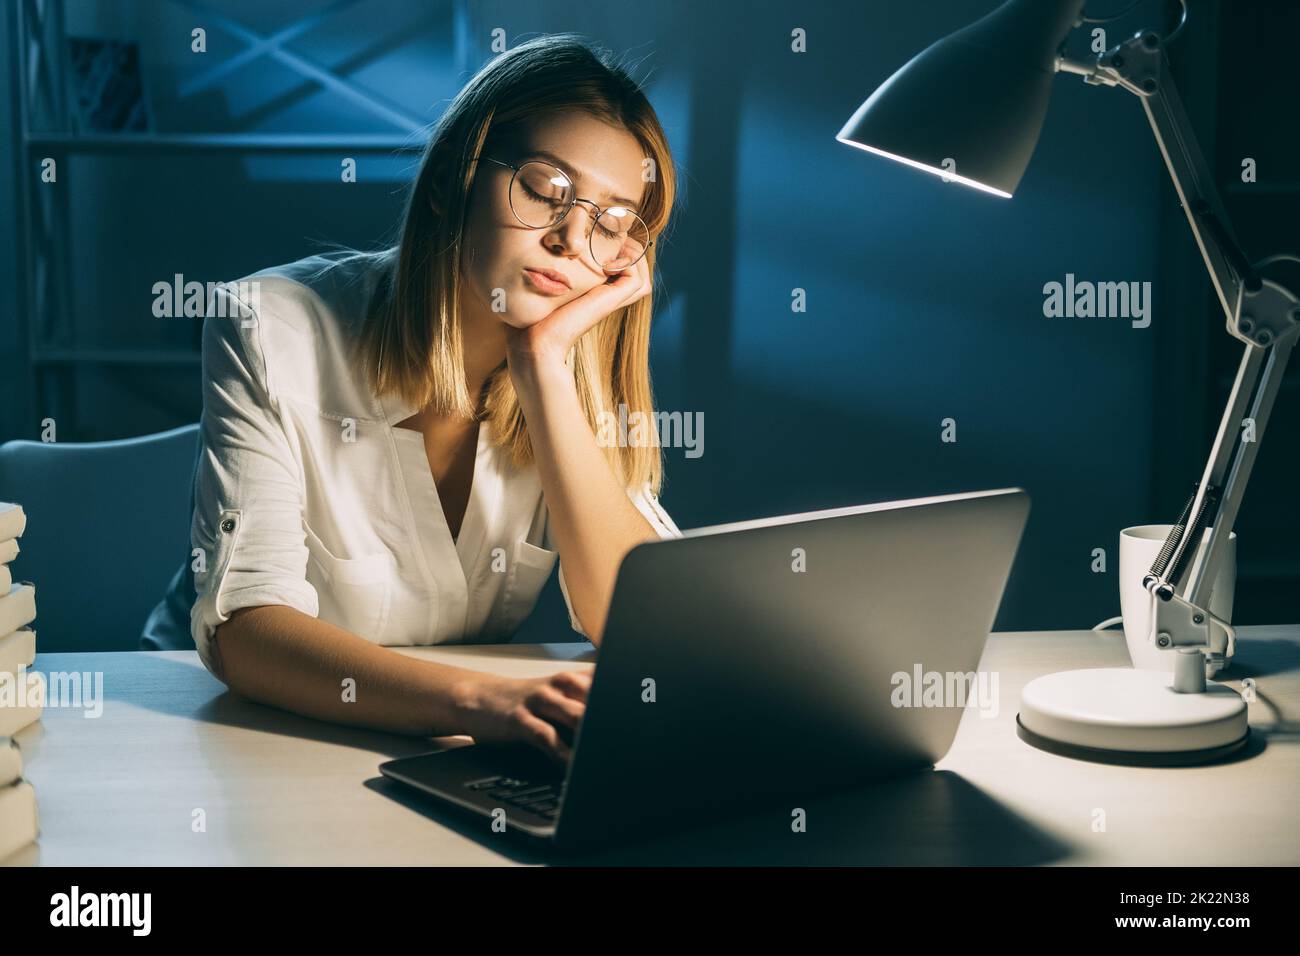 Work fatigue. Overworking from home. Remote job. Sleeping tired exhausted woman working on laptop typing in her dream in dark office workspace Stock Photo